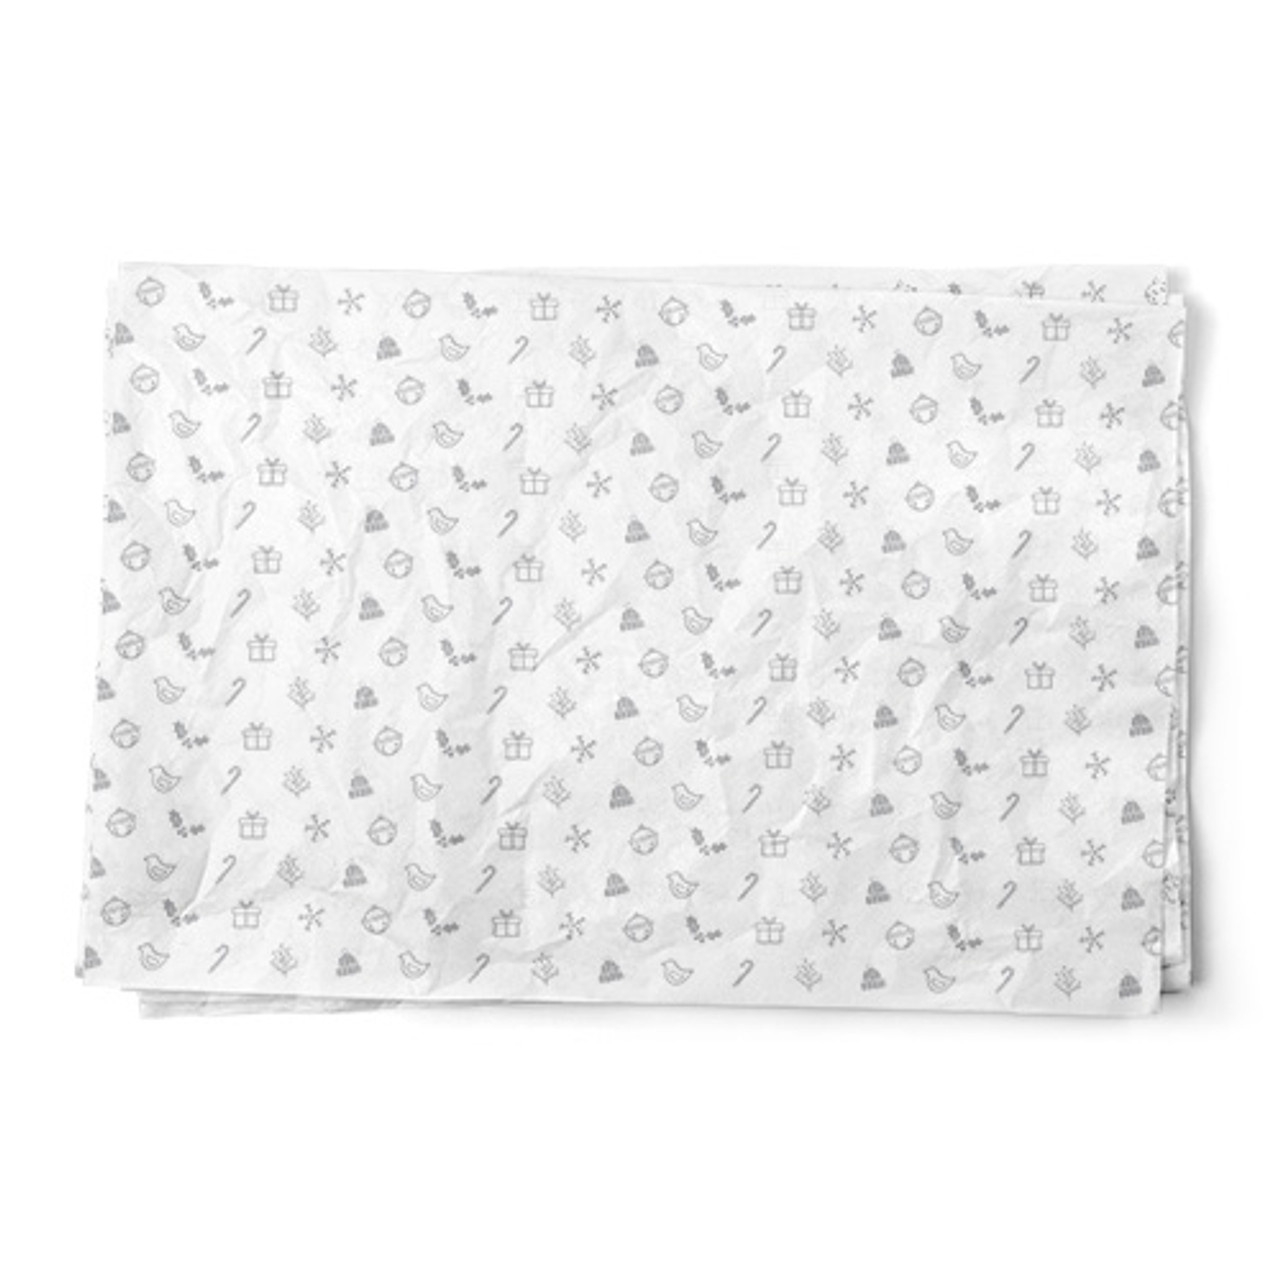 Decorative 100% Recycled Tissue Paper - Grey Holiday Icons on